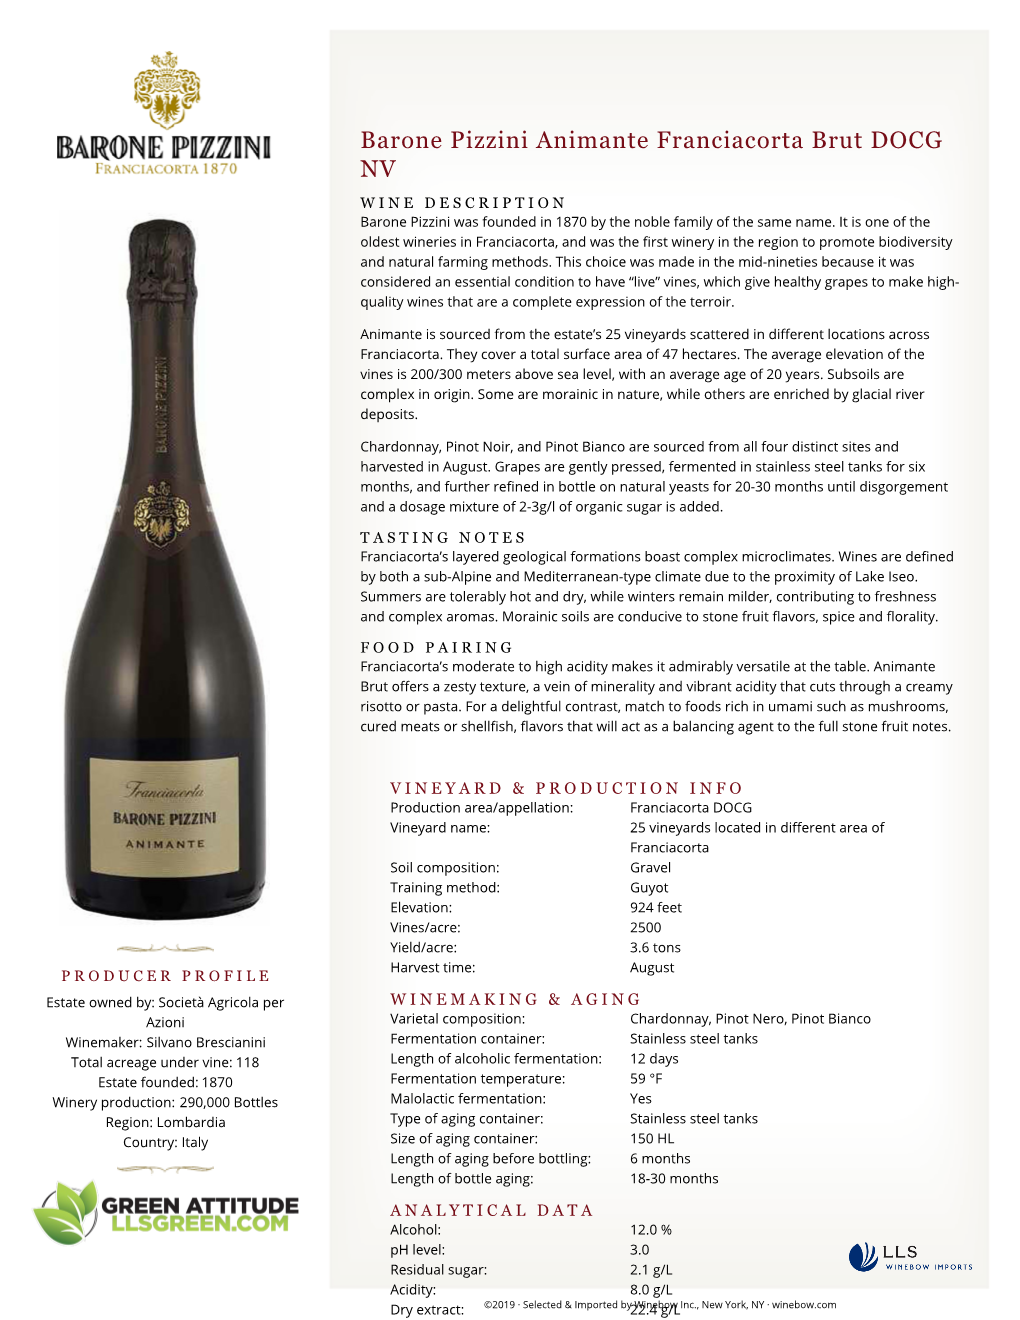 Barone Pizzini Animante Franciacorta Brut DOCG NV W I N E D E S C R I P T I O N Barone Pizzini Was Founded in 1870 by the Noble Family of the Same Name